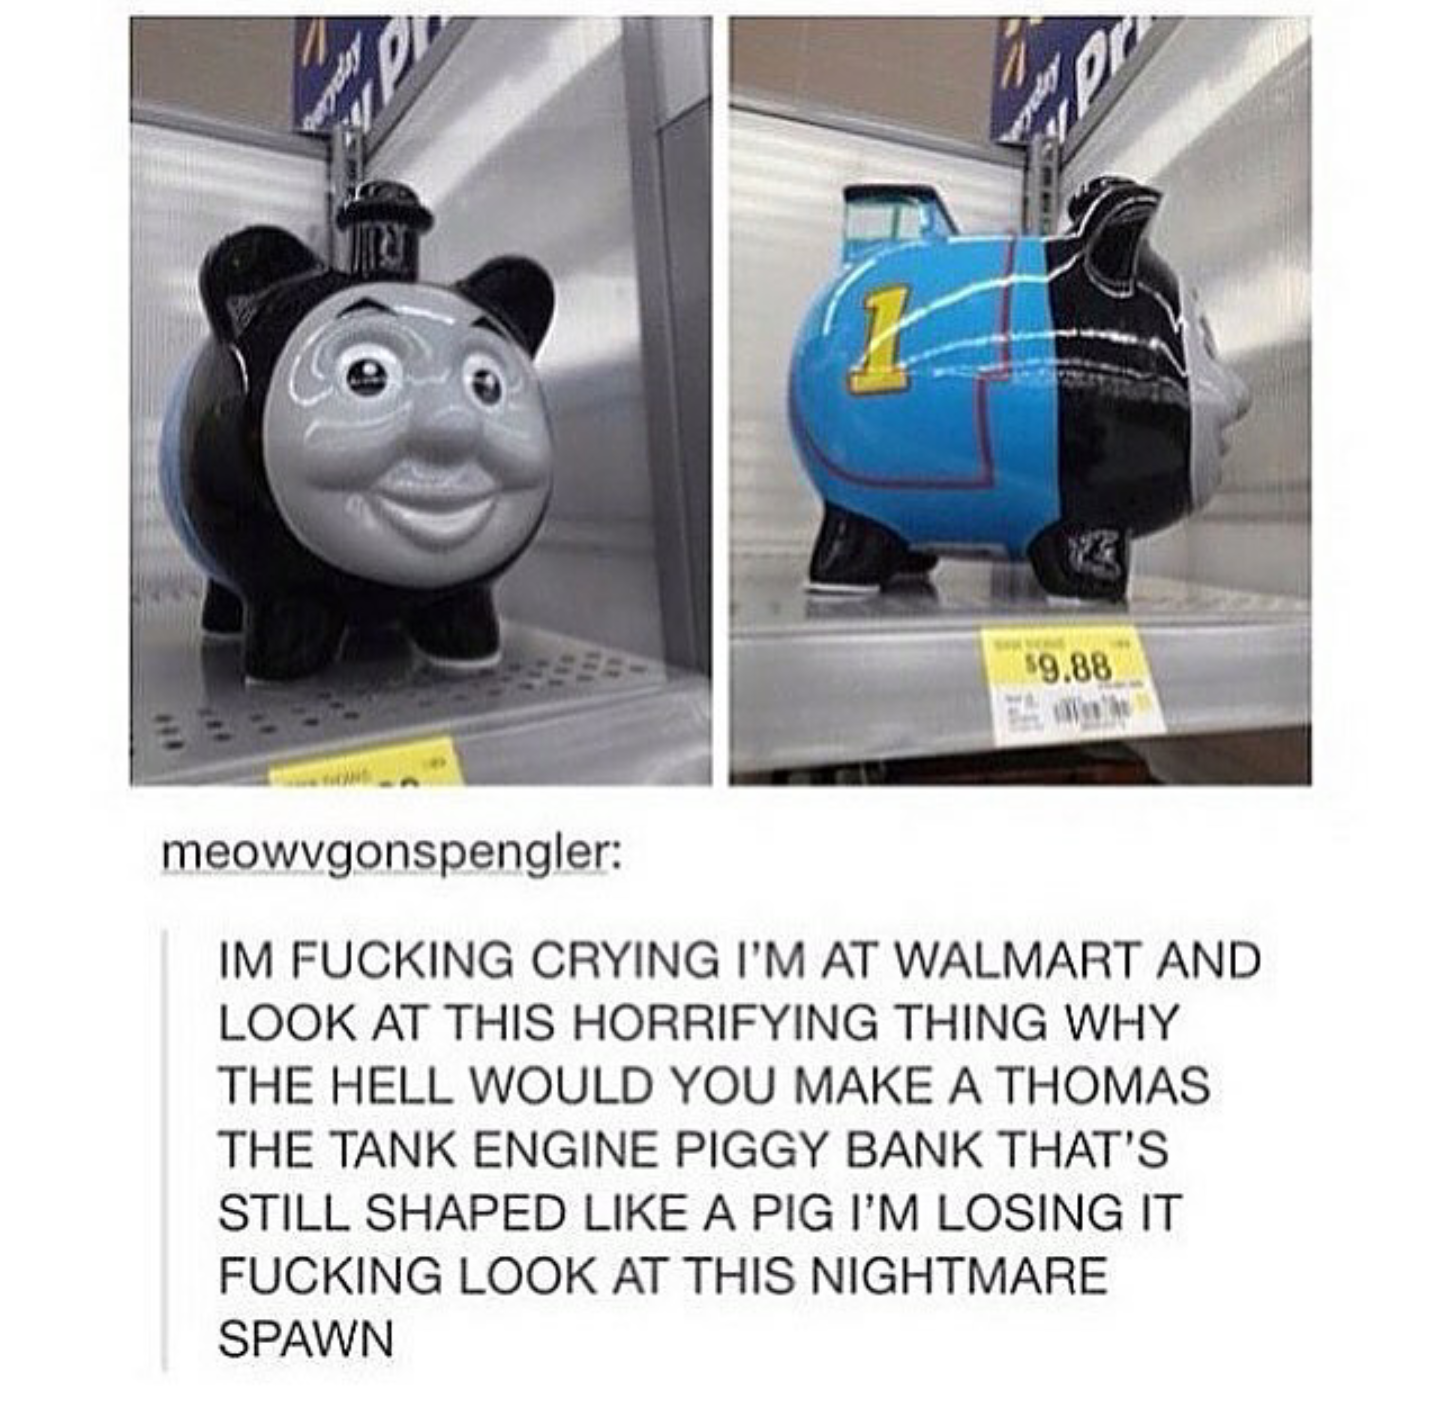 funny meme about thomas the tank engine funny - 19.88 's meowvgonspengler Im Fucking Crying I'M At Walmart And Look At This Horrifying Thing Why The Hell Would You Make A Thomas The Tank Engine Piggy Bank That'S Still Shaped A Pig I'M Losing It Fucking Lo